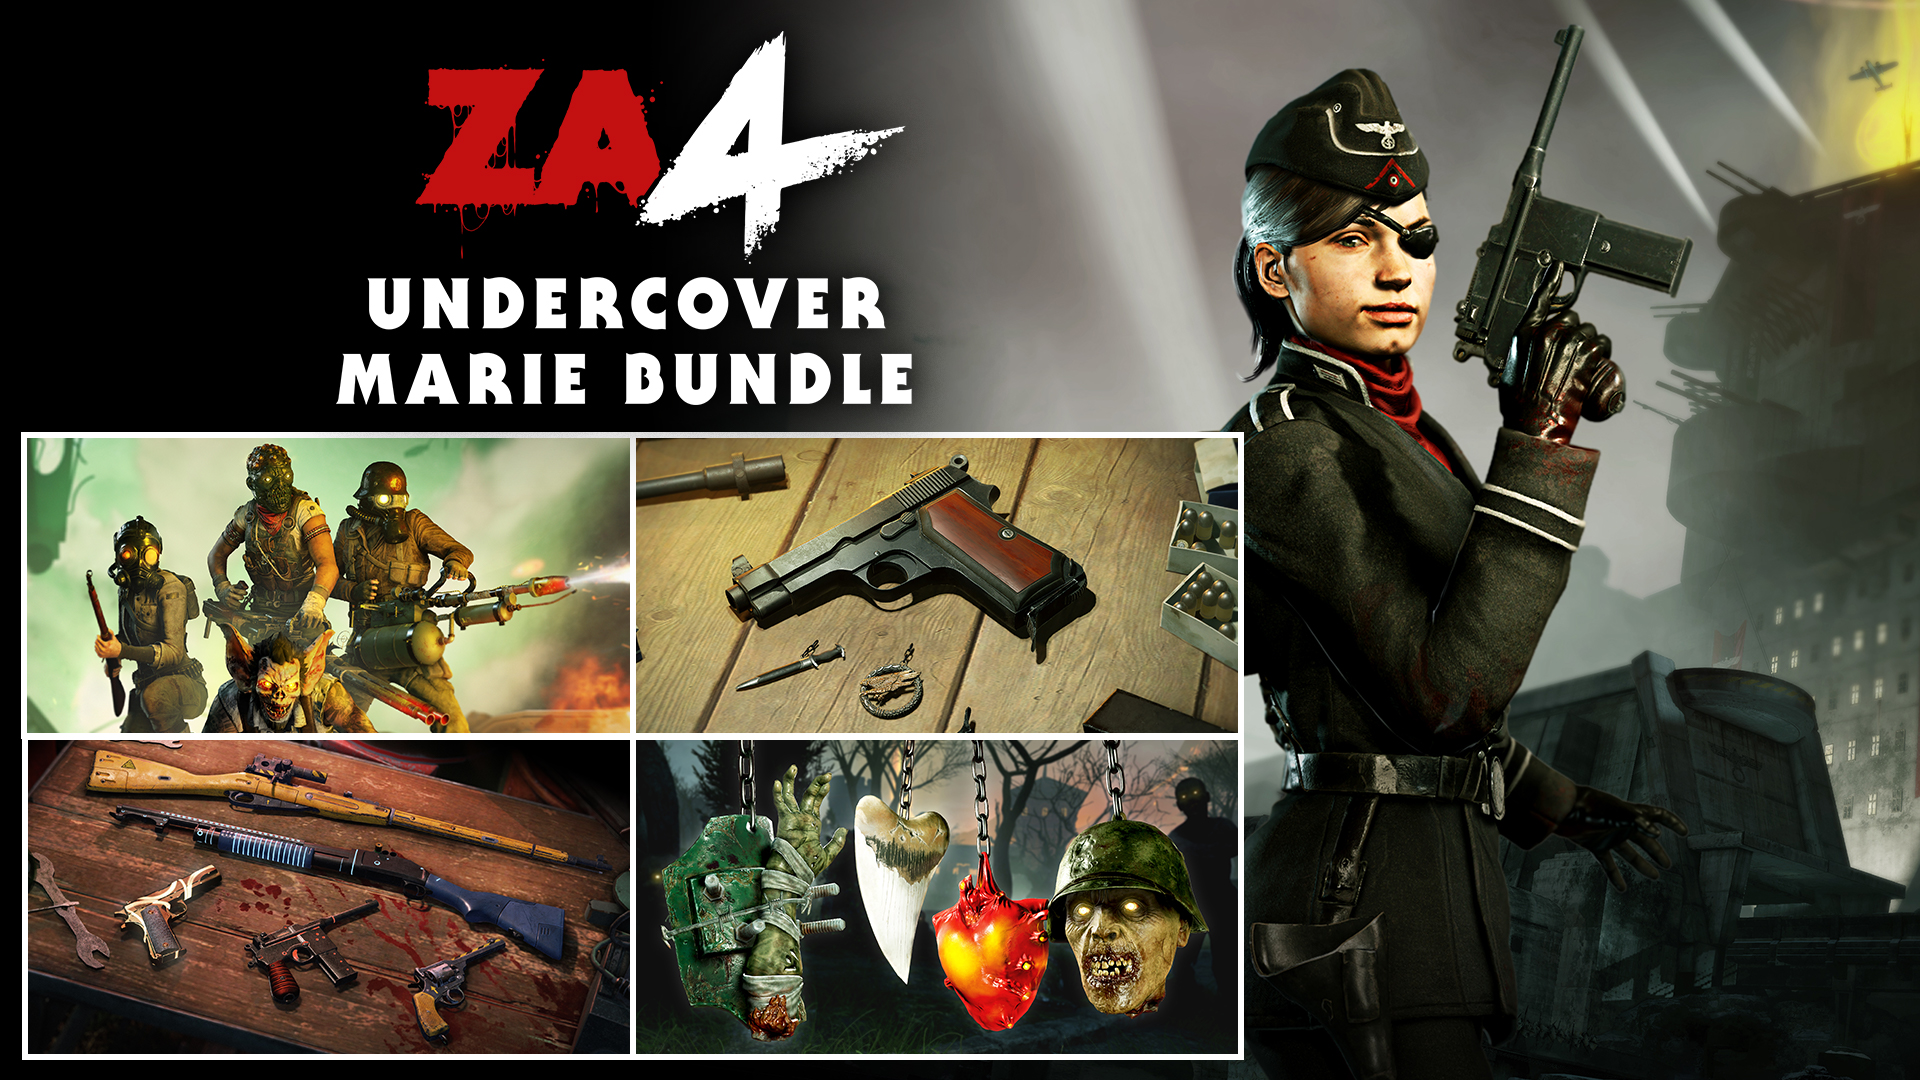 Zombie Army 4: Undercover Marie Bundle